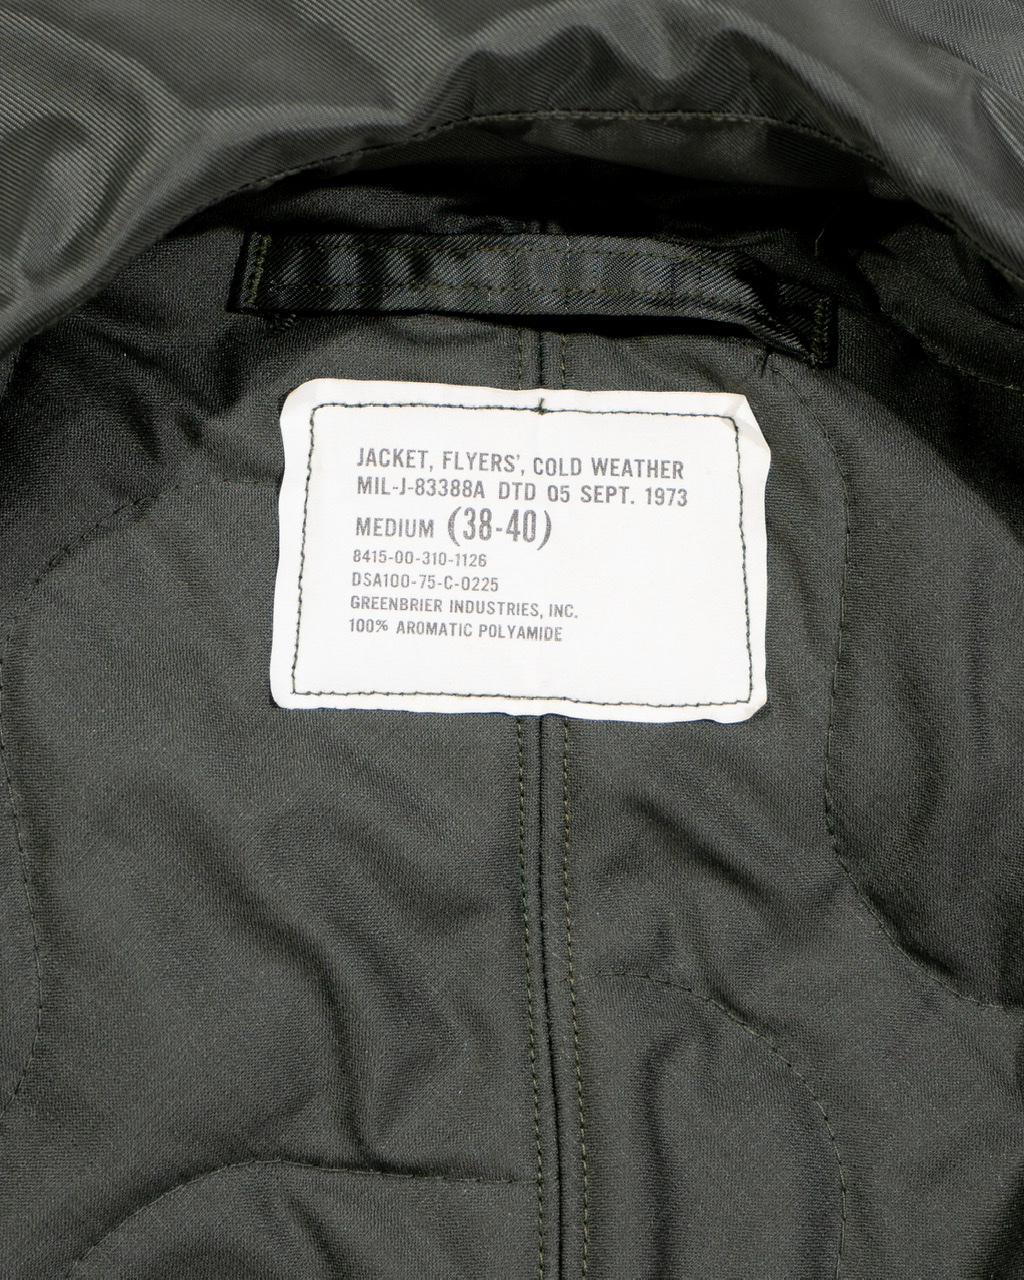 N.O.S. GREENBRIER INDUSTRIES, INC. COLD WEATHER FLYERS’ JACKET MIL-J ...